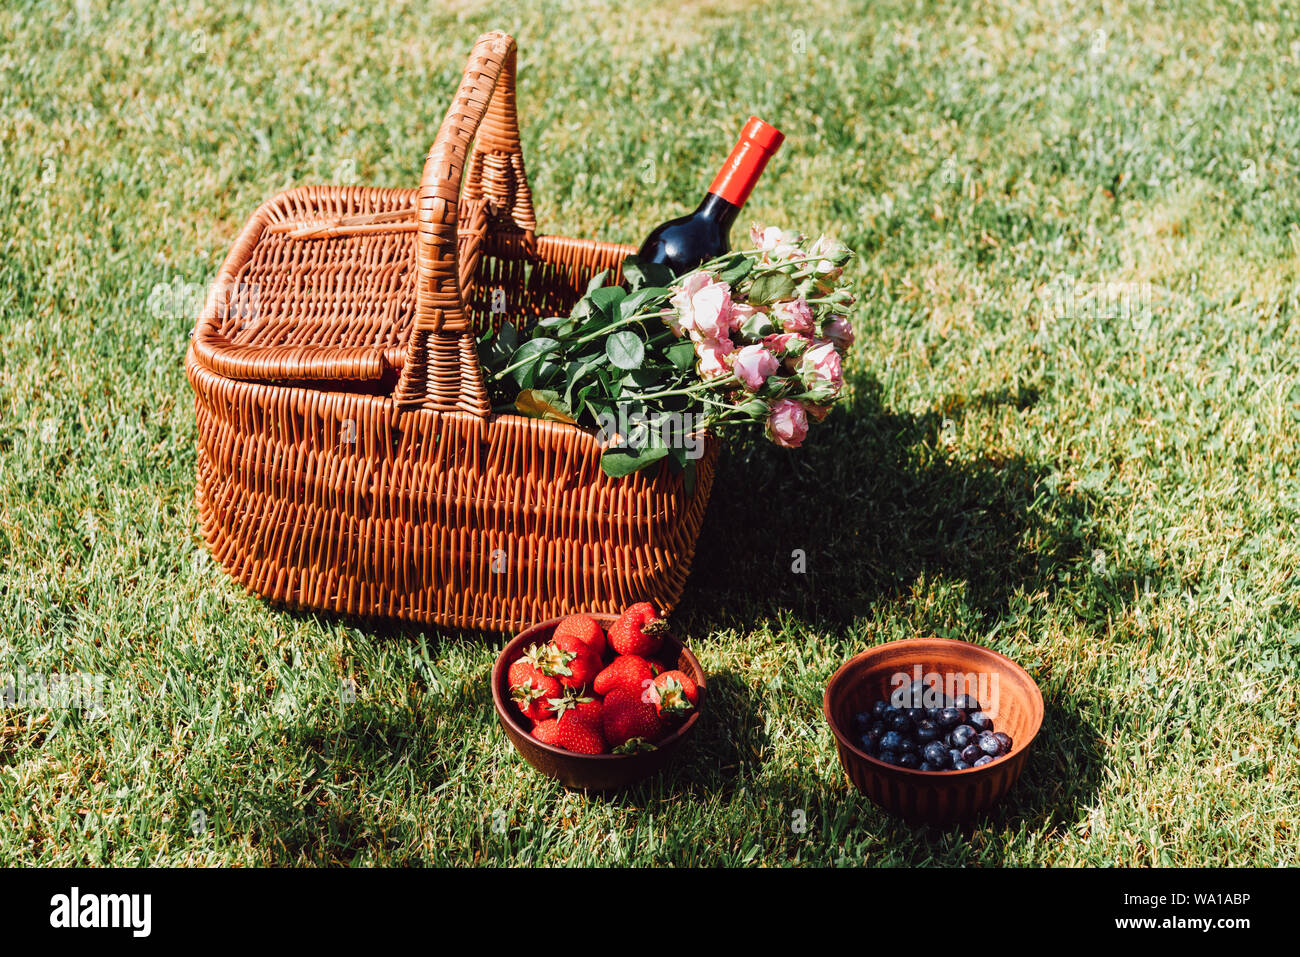 wicker basket with roses and bottle of wine on green grass near strawberries and blueberries in bowls at sunny day in garden Stock Photo